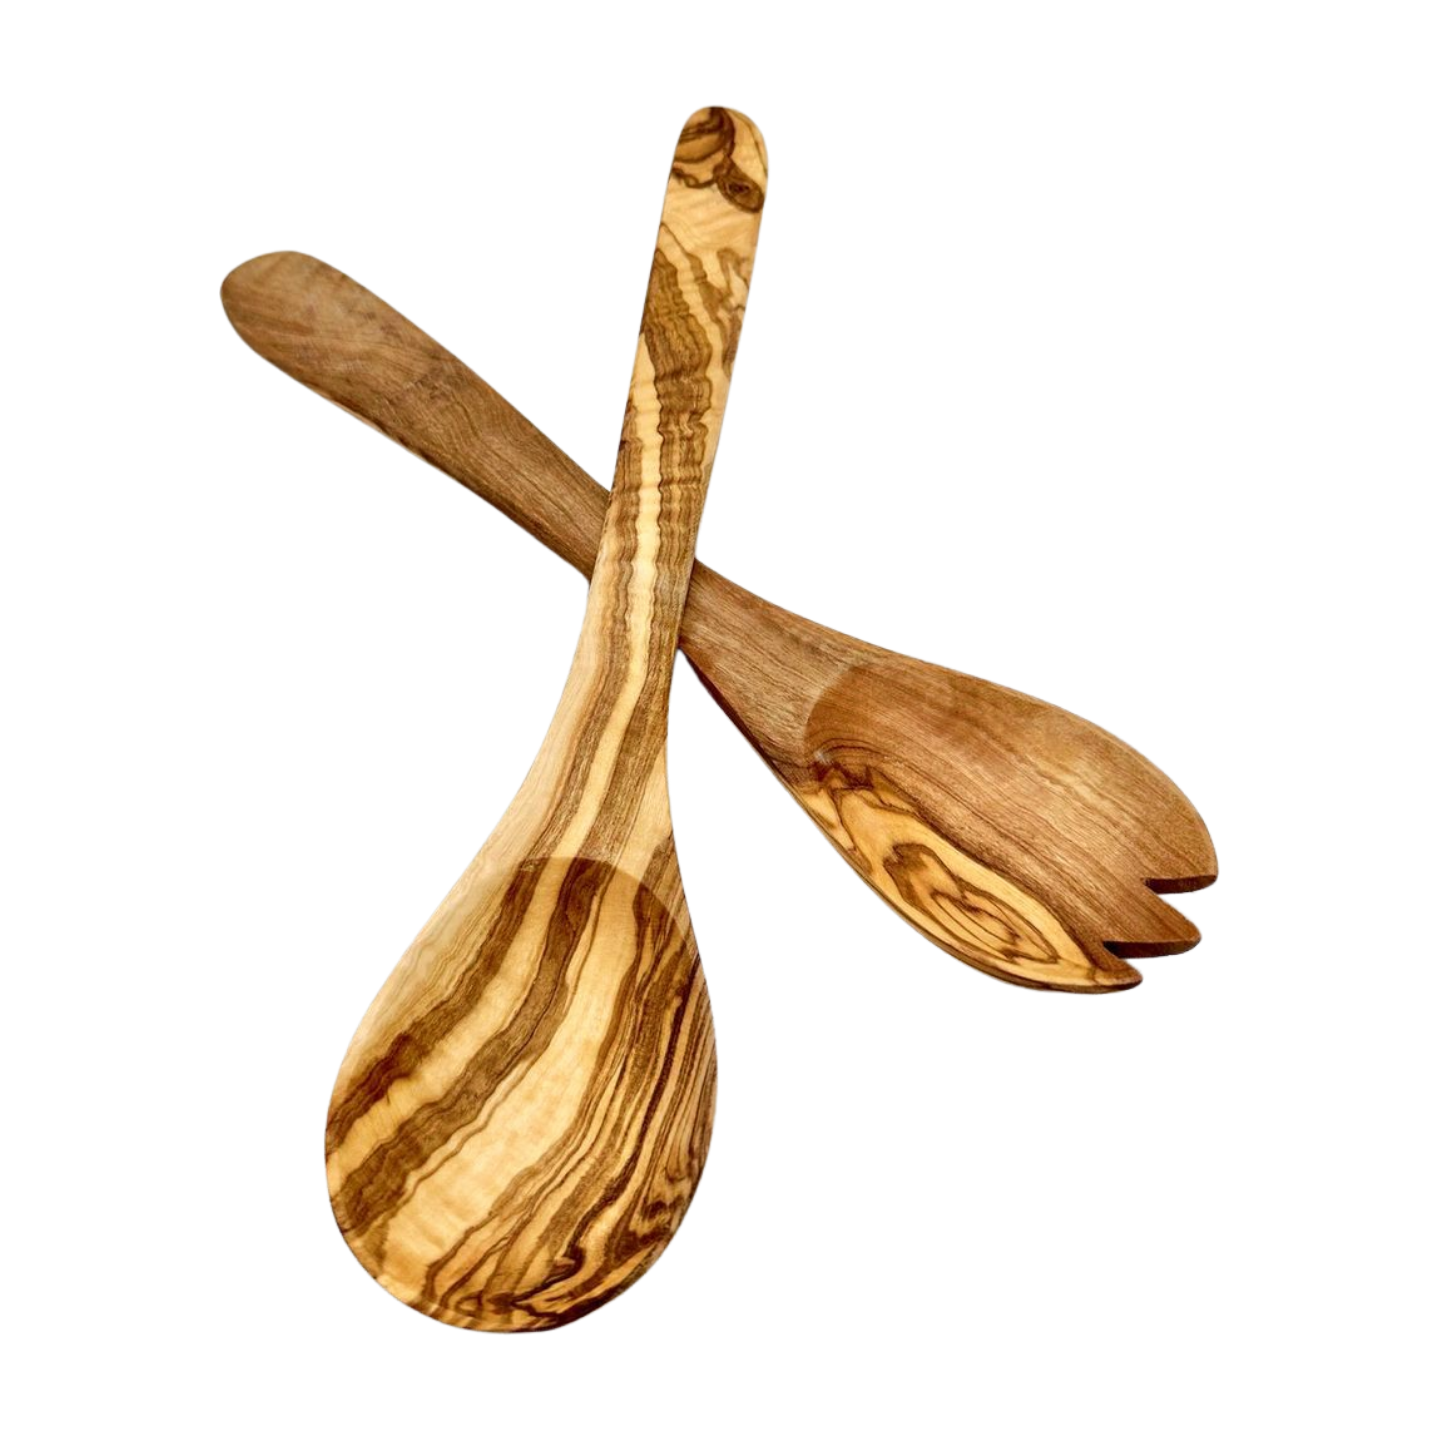 2-Piece olive wood salad serving set. Includes one large fork and one large spoon. Imported from Germany.